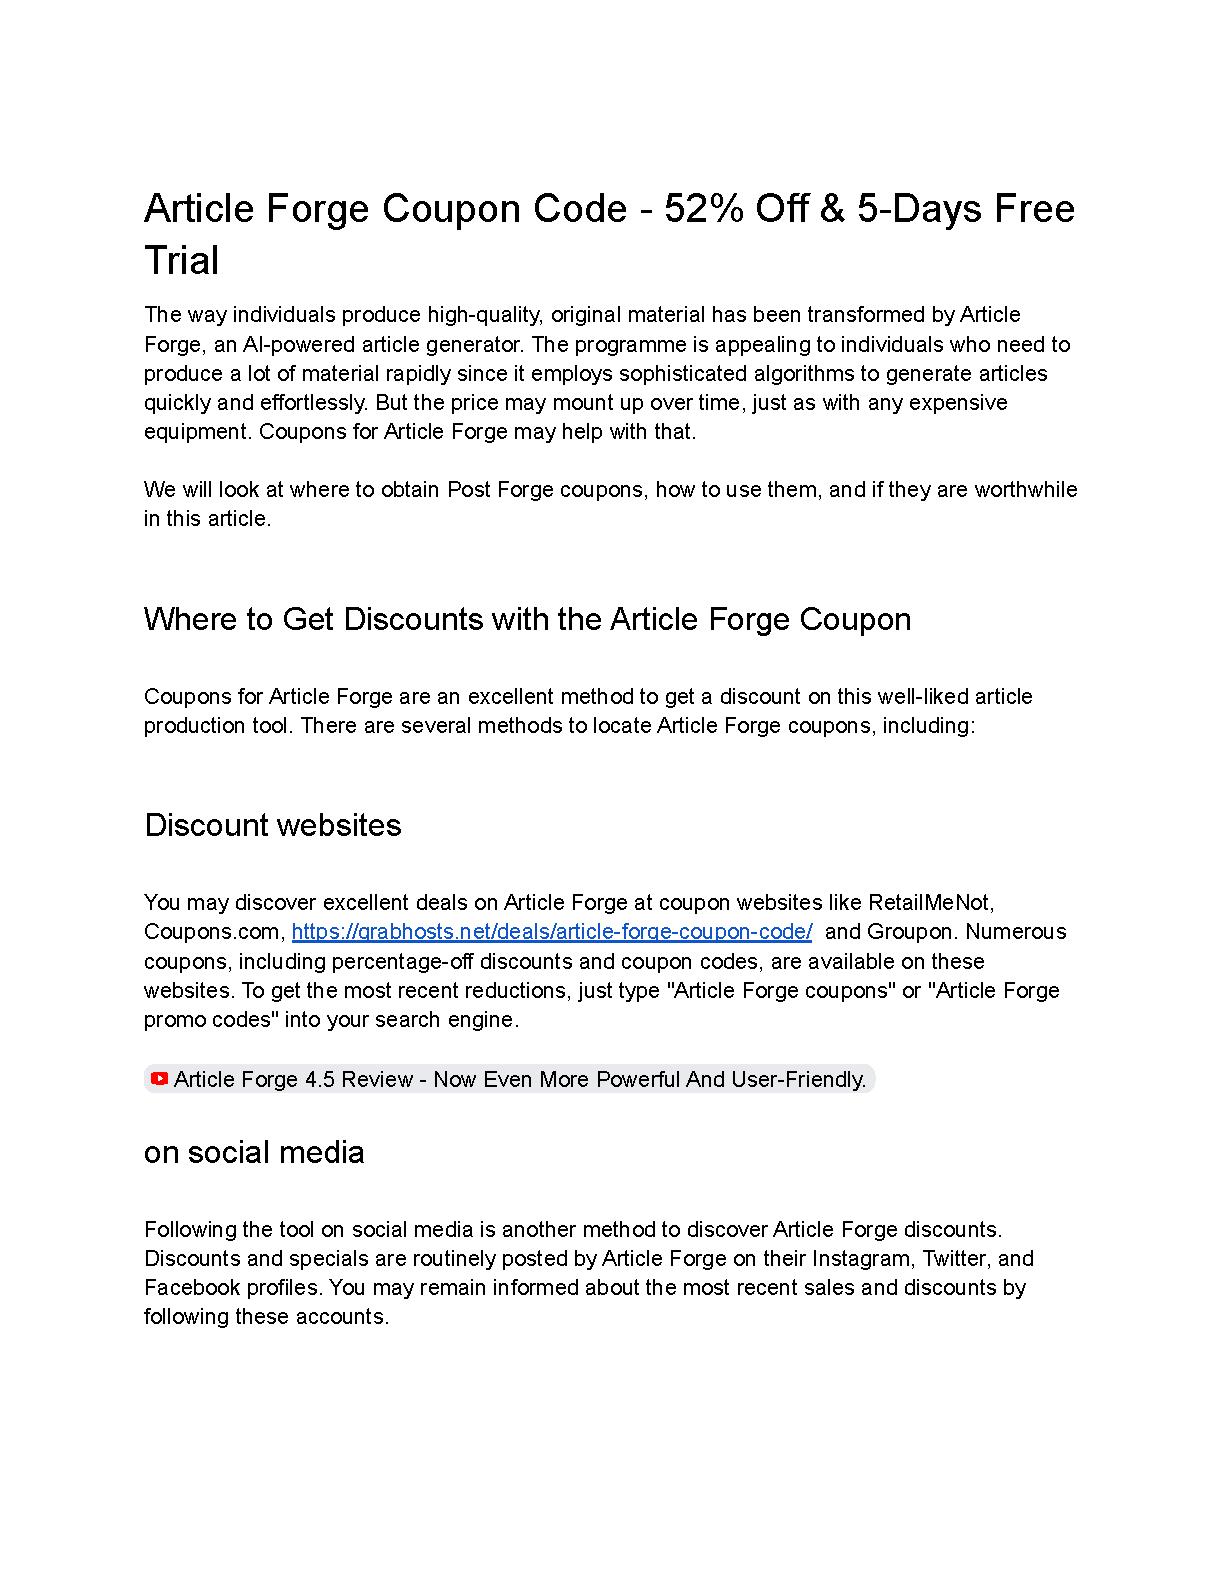 Article Forge Coupon Code | PDF Host